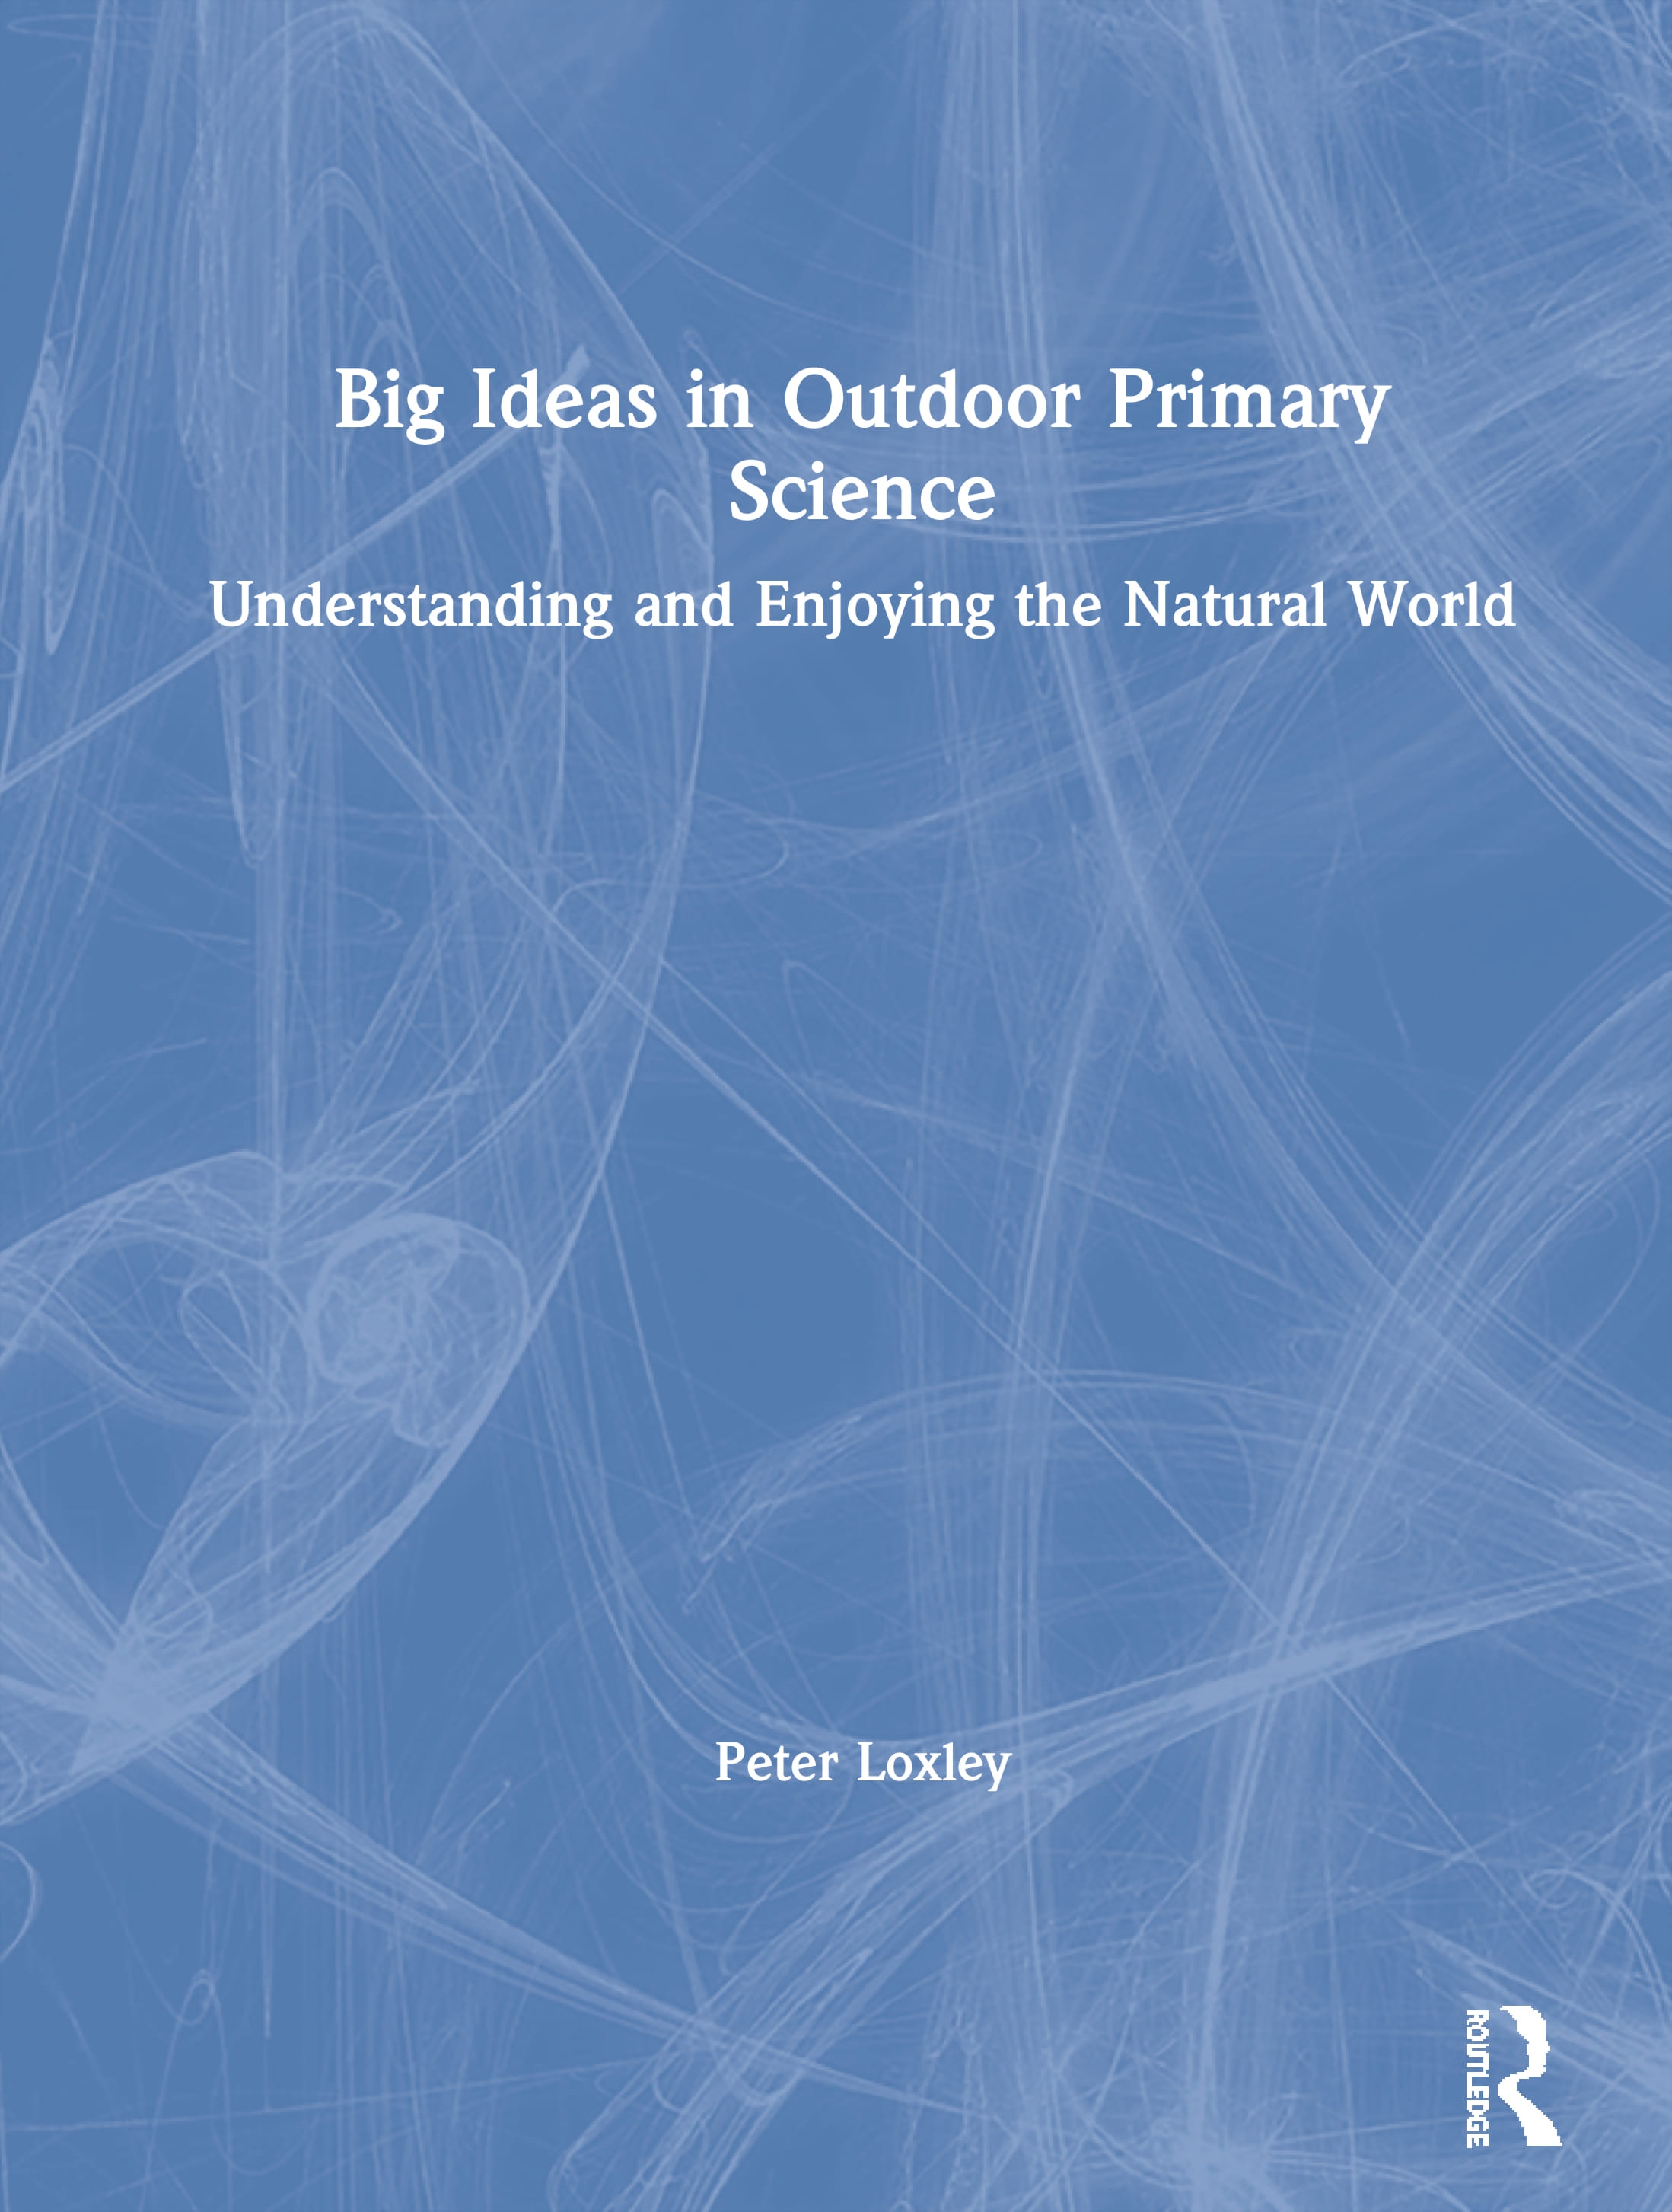 Big Ideas in Outdoor Primary Science: Understanding and Enjoying the Natural World